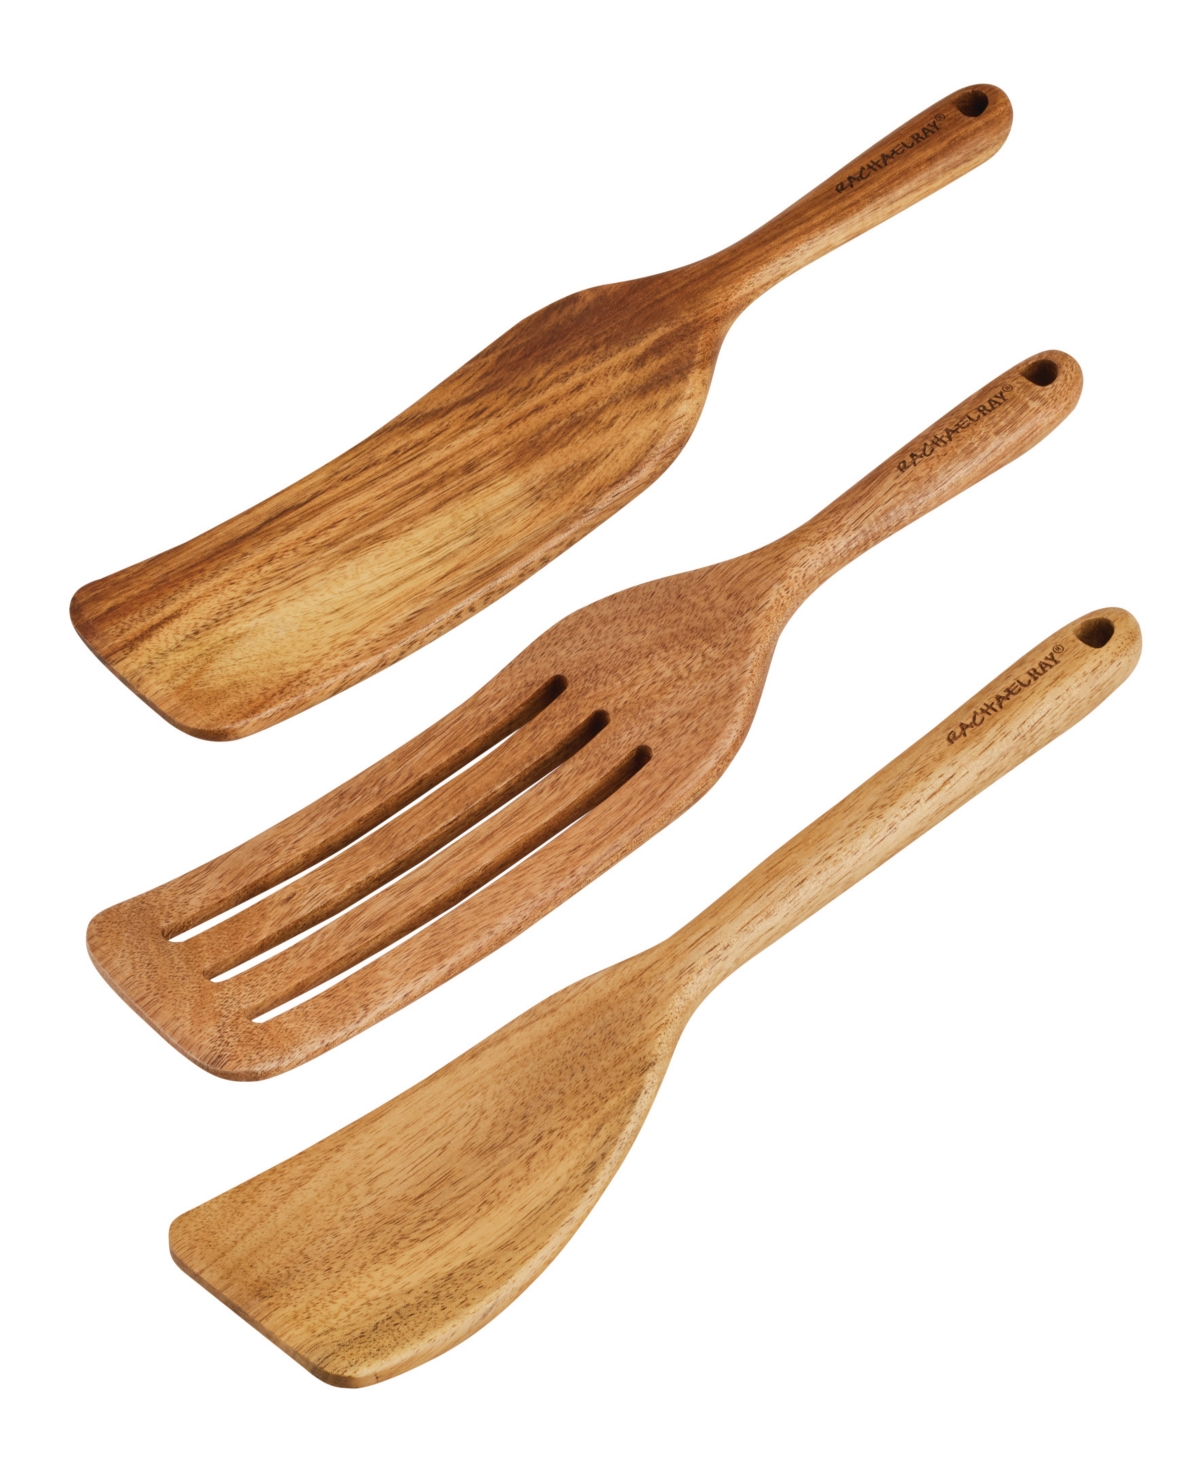 Rachael Ray Tools And Gadgets Wooden Kitchen Utensils, Set Of 3 In Acacia Wood